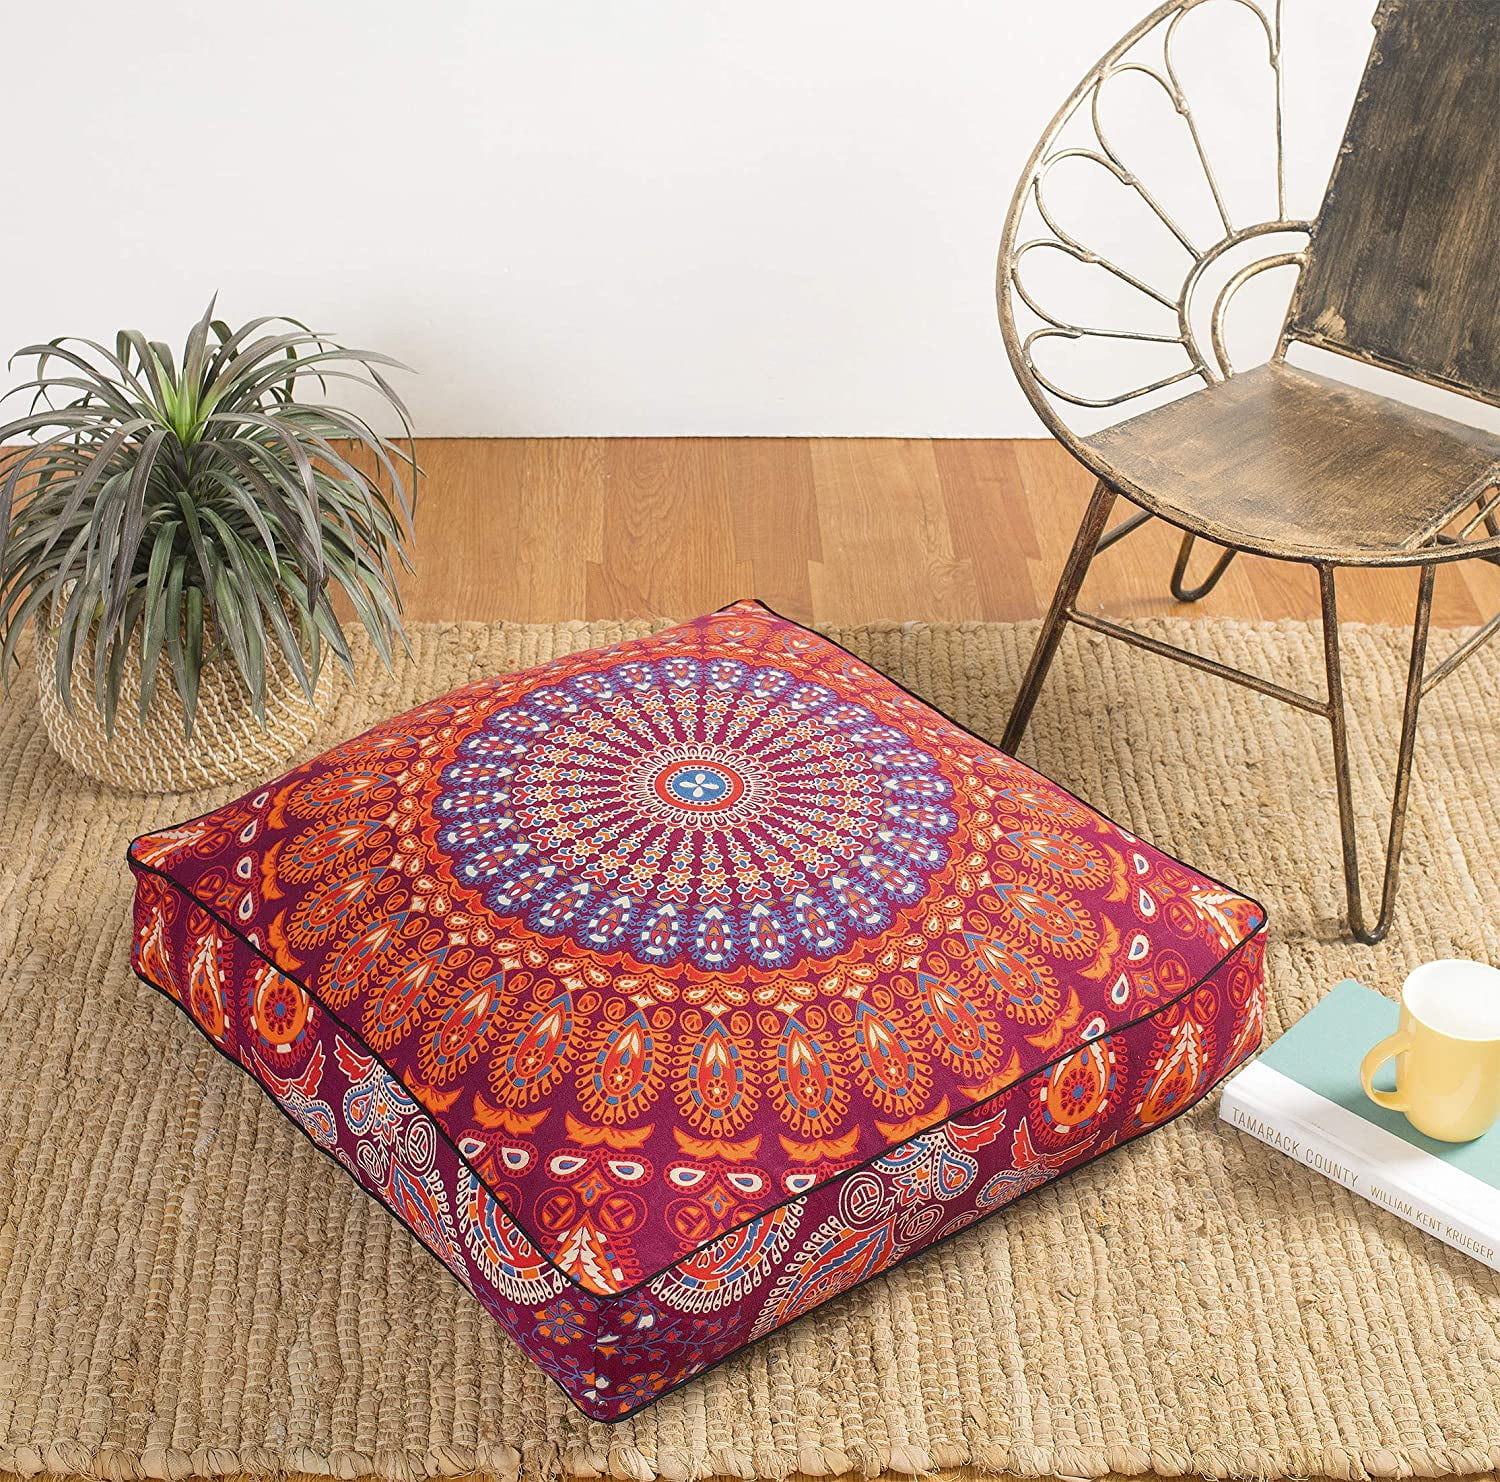 35 Large Indian Multi Round Elephant Mandala MultiColor Square dog bed Cover Floor Cushion Cover Ottoman Square Yoga Mat Pet Bed Throw